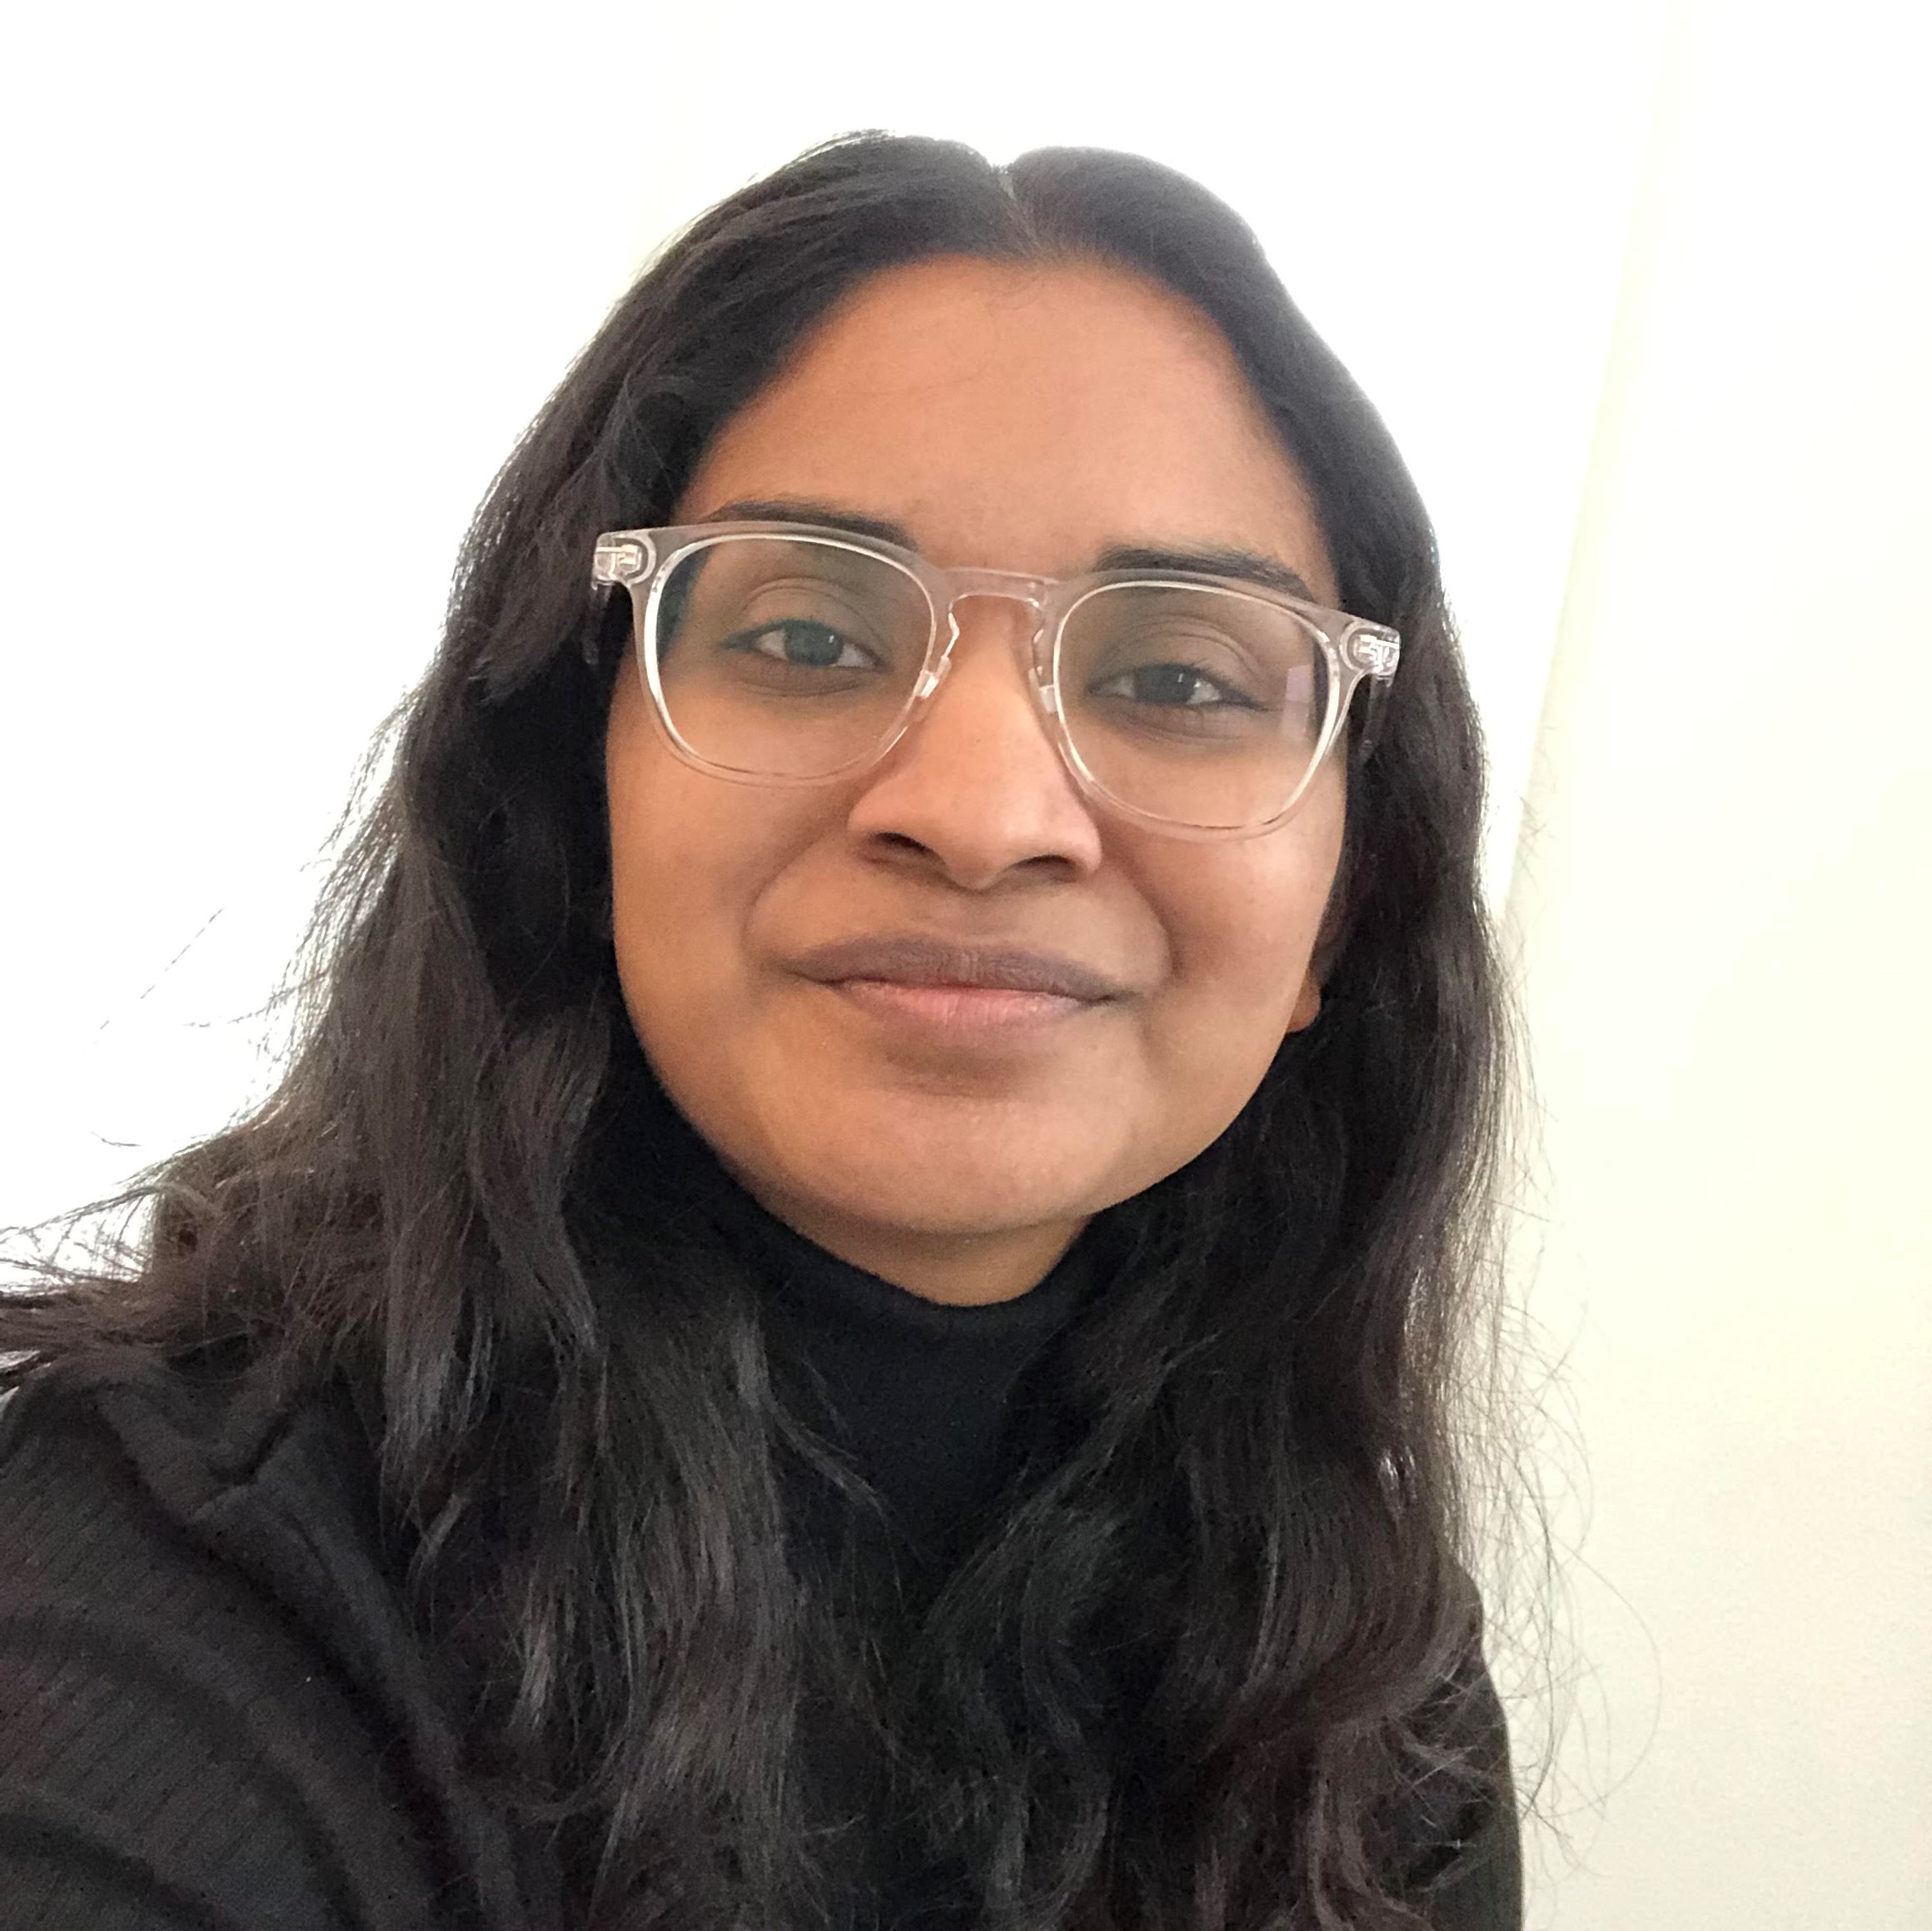 A picture of me (Sruthi) smiling, wearing a black turtleneck and clear glasses!